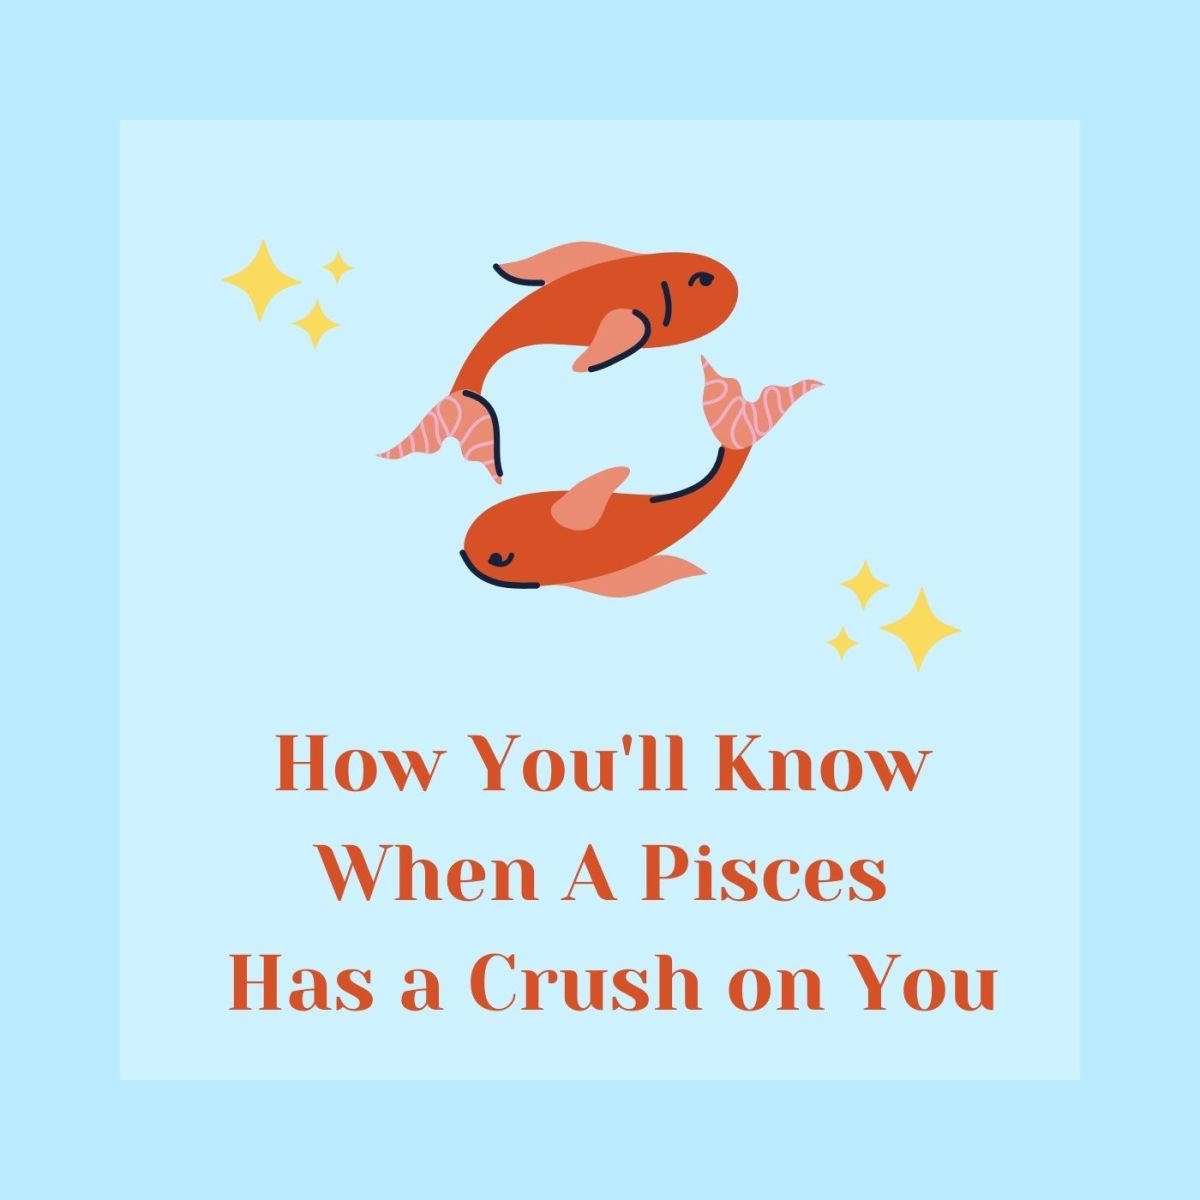 30 Things a Pisces Does When They Have a Crush on You